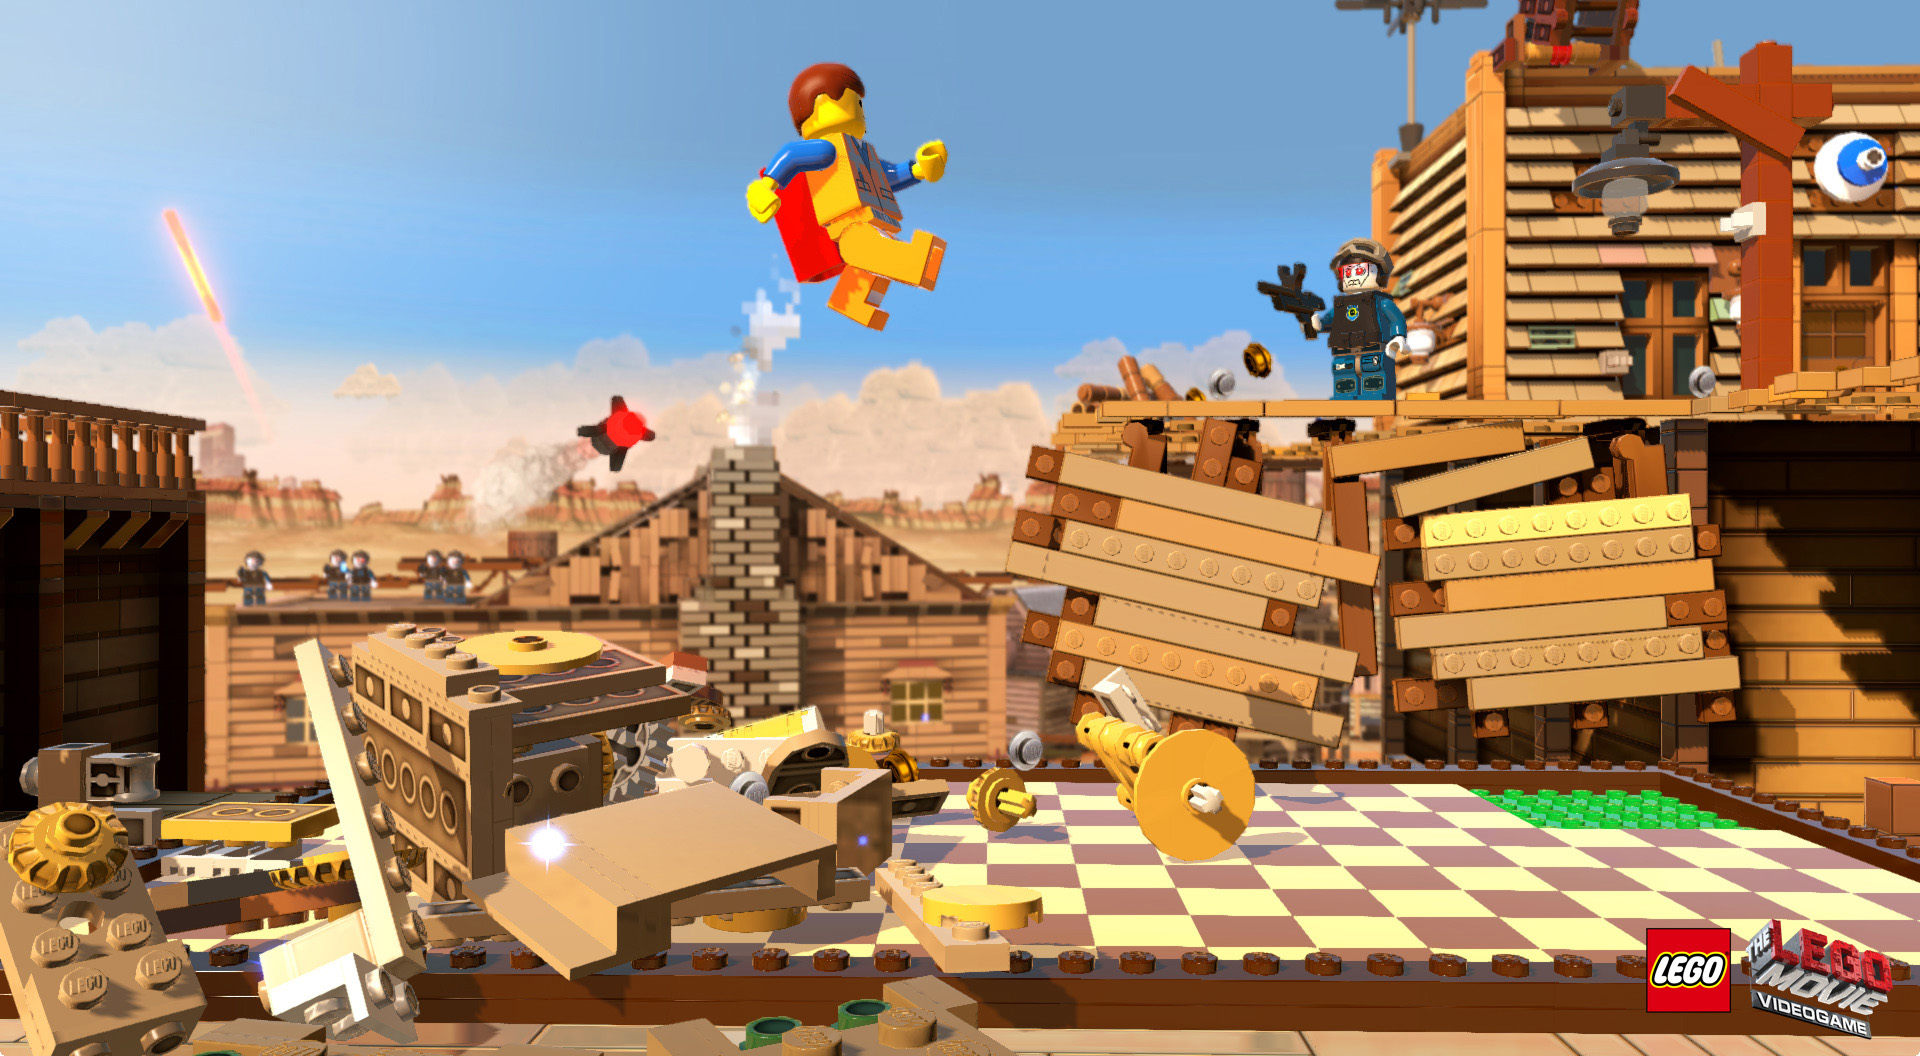 You’ve Seen LEGO Movie Games. Now There’s A Game Of The LEGO Movie.